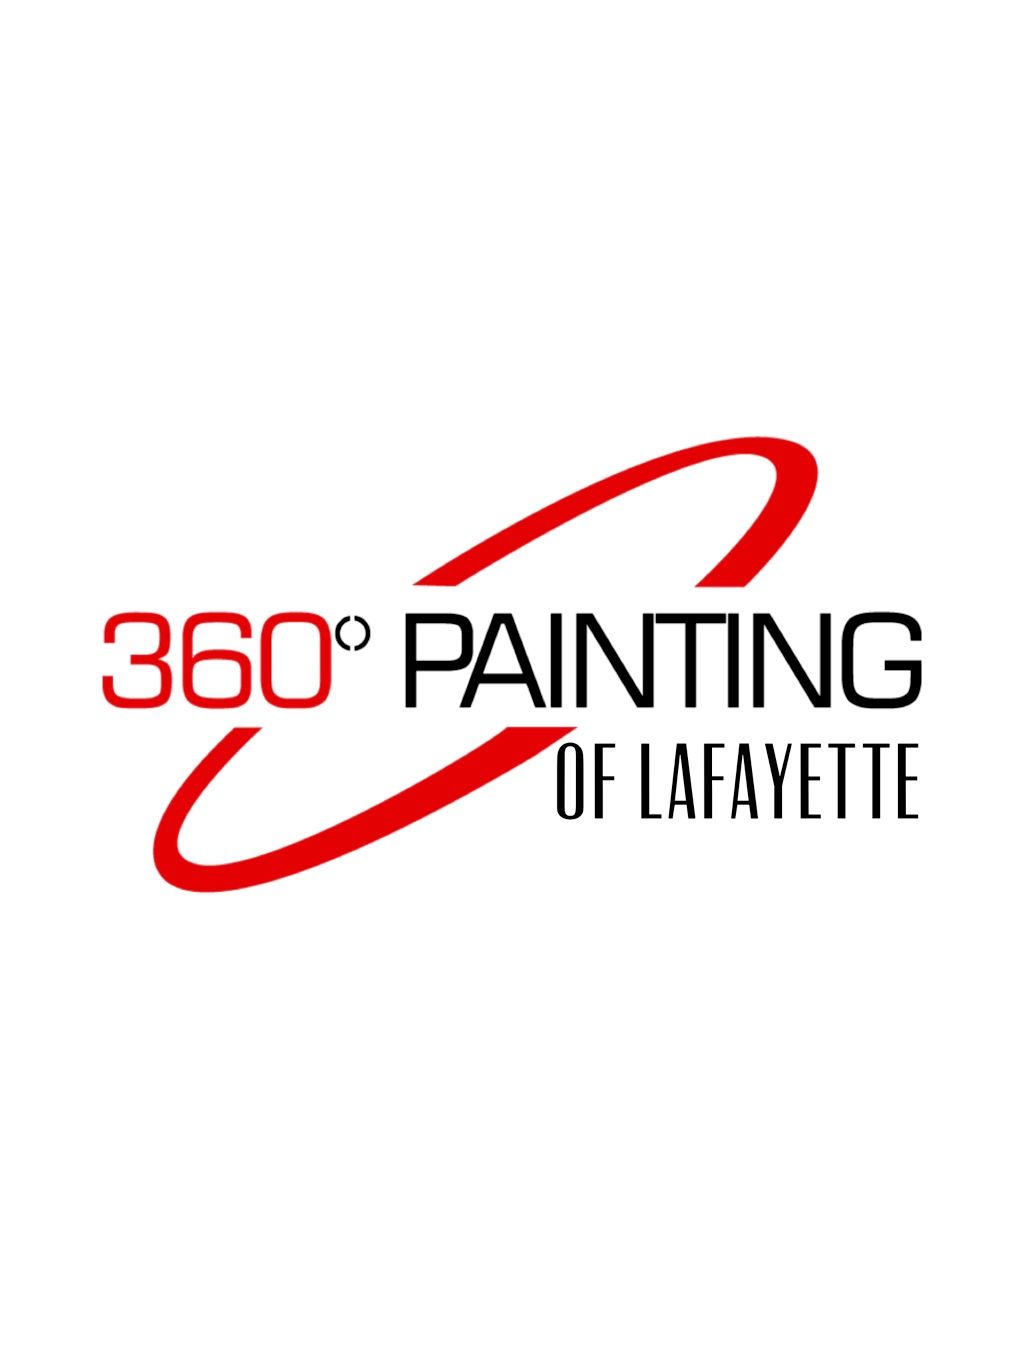 360 Painting of Lafayette